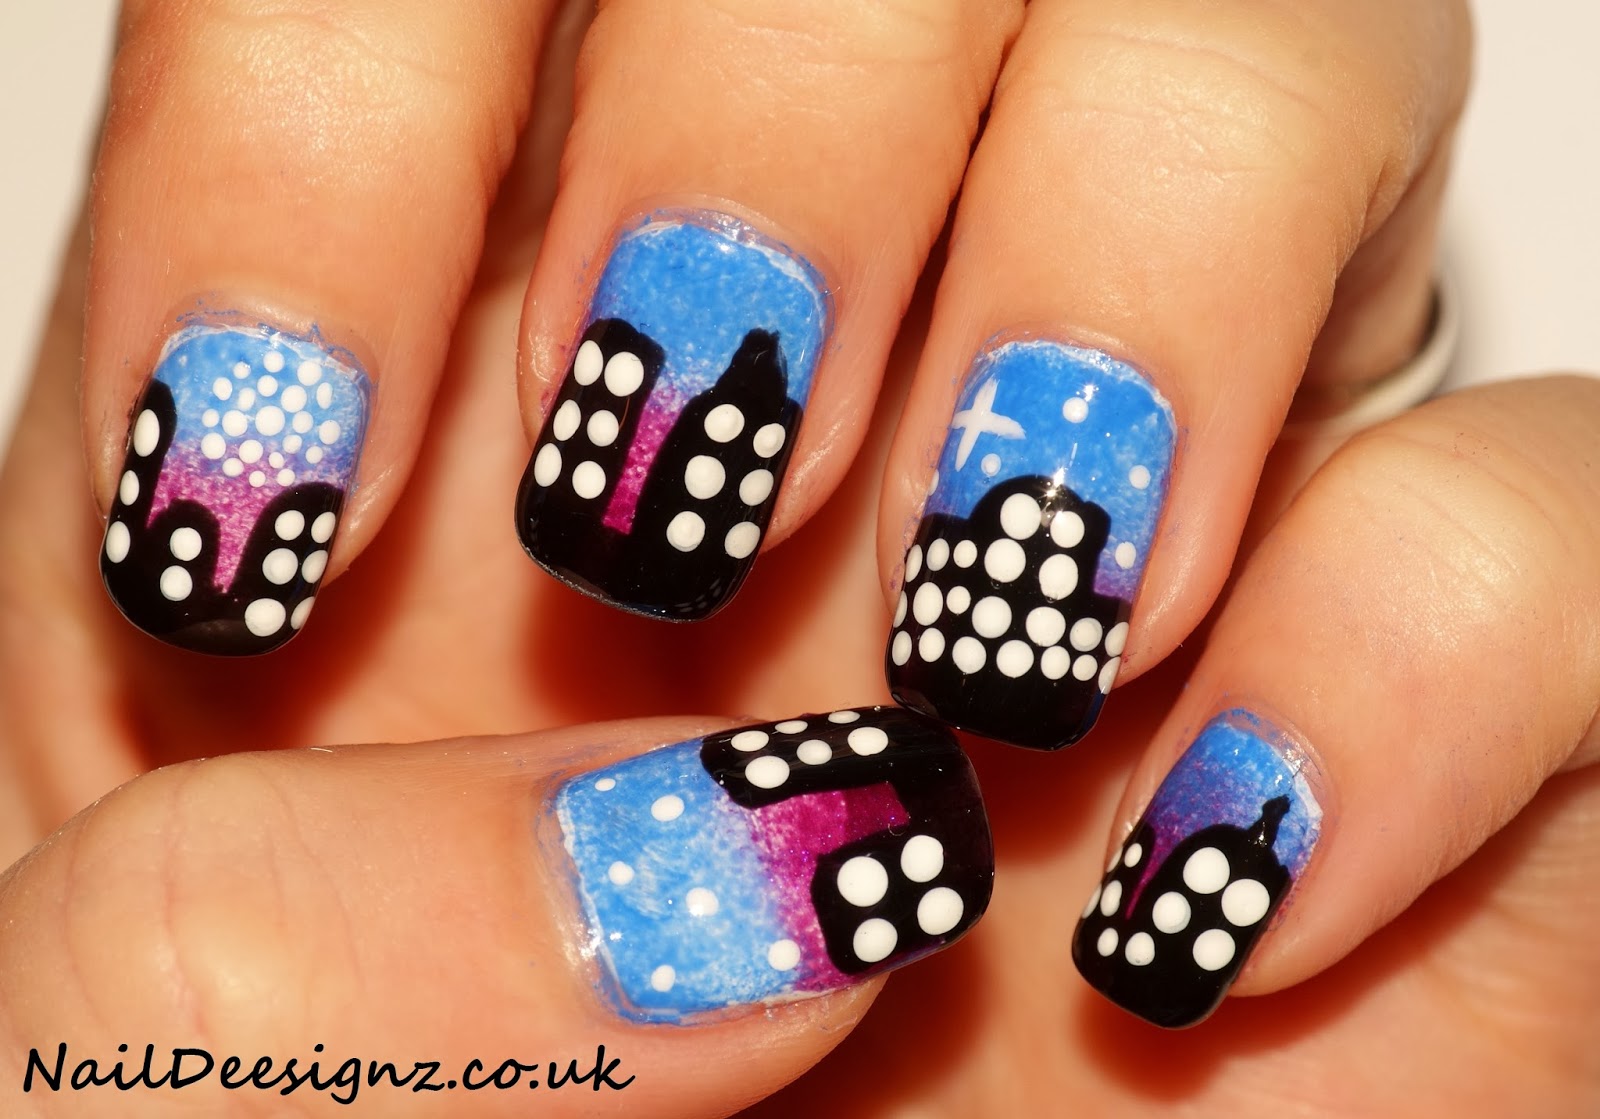 9. Sparkly Fireworks Nail Art Tutorial - wide 5